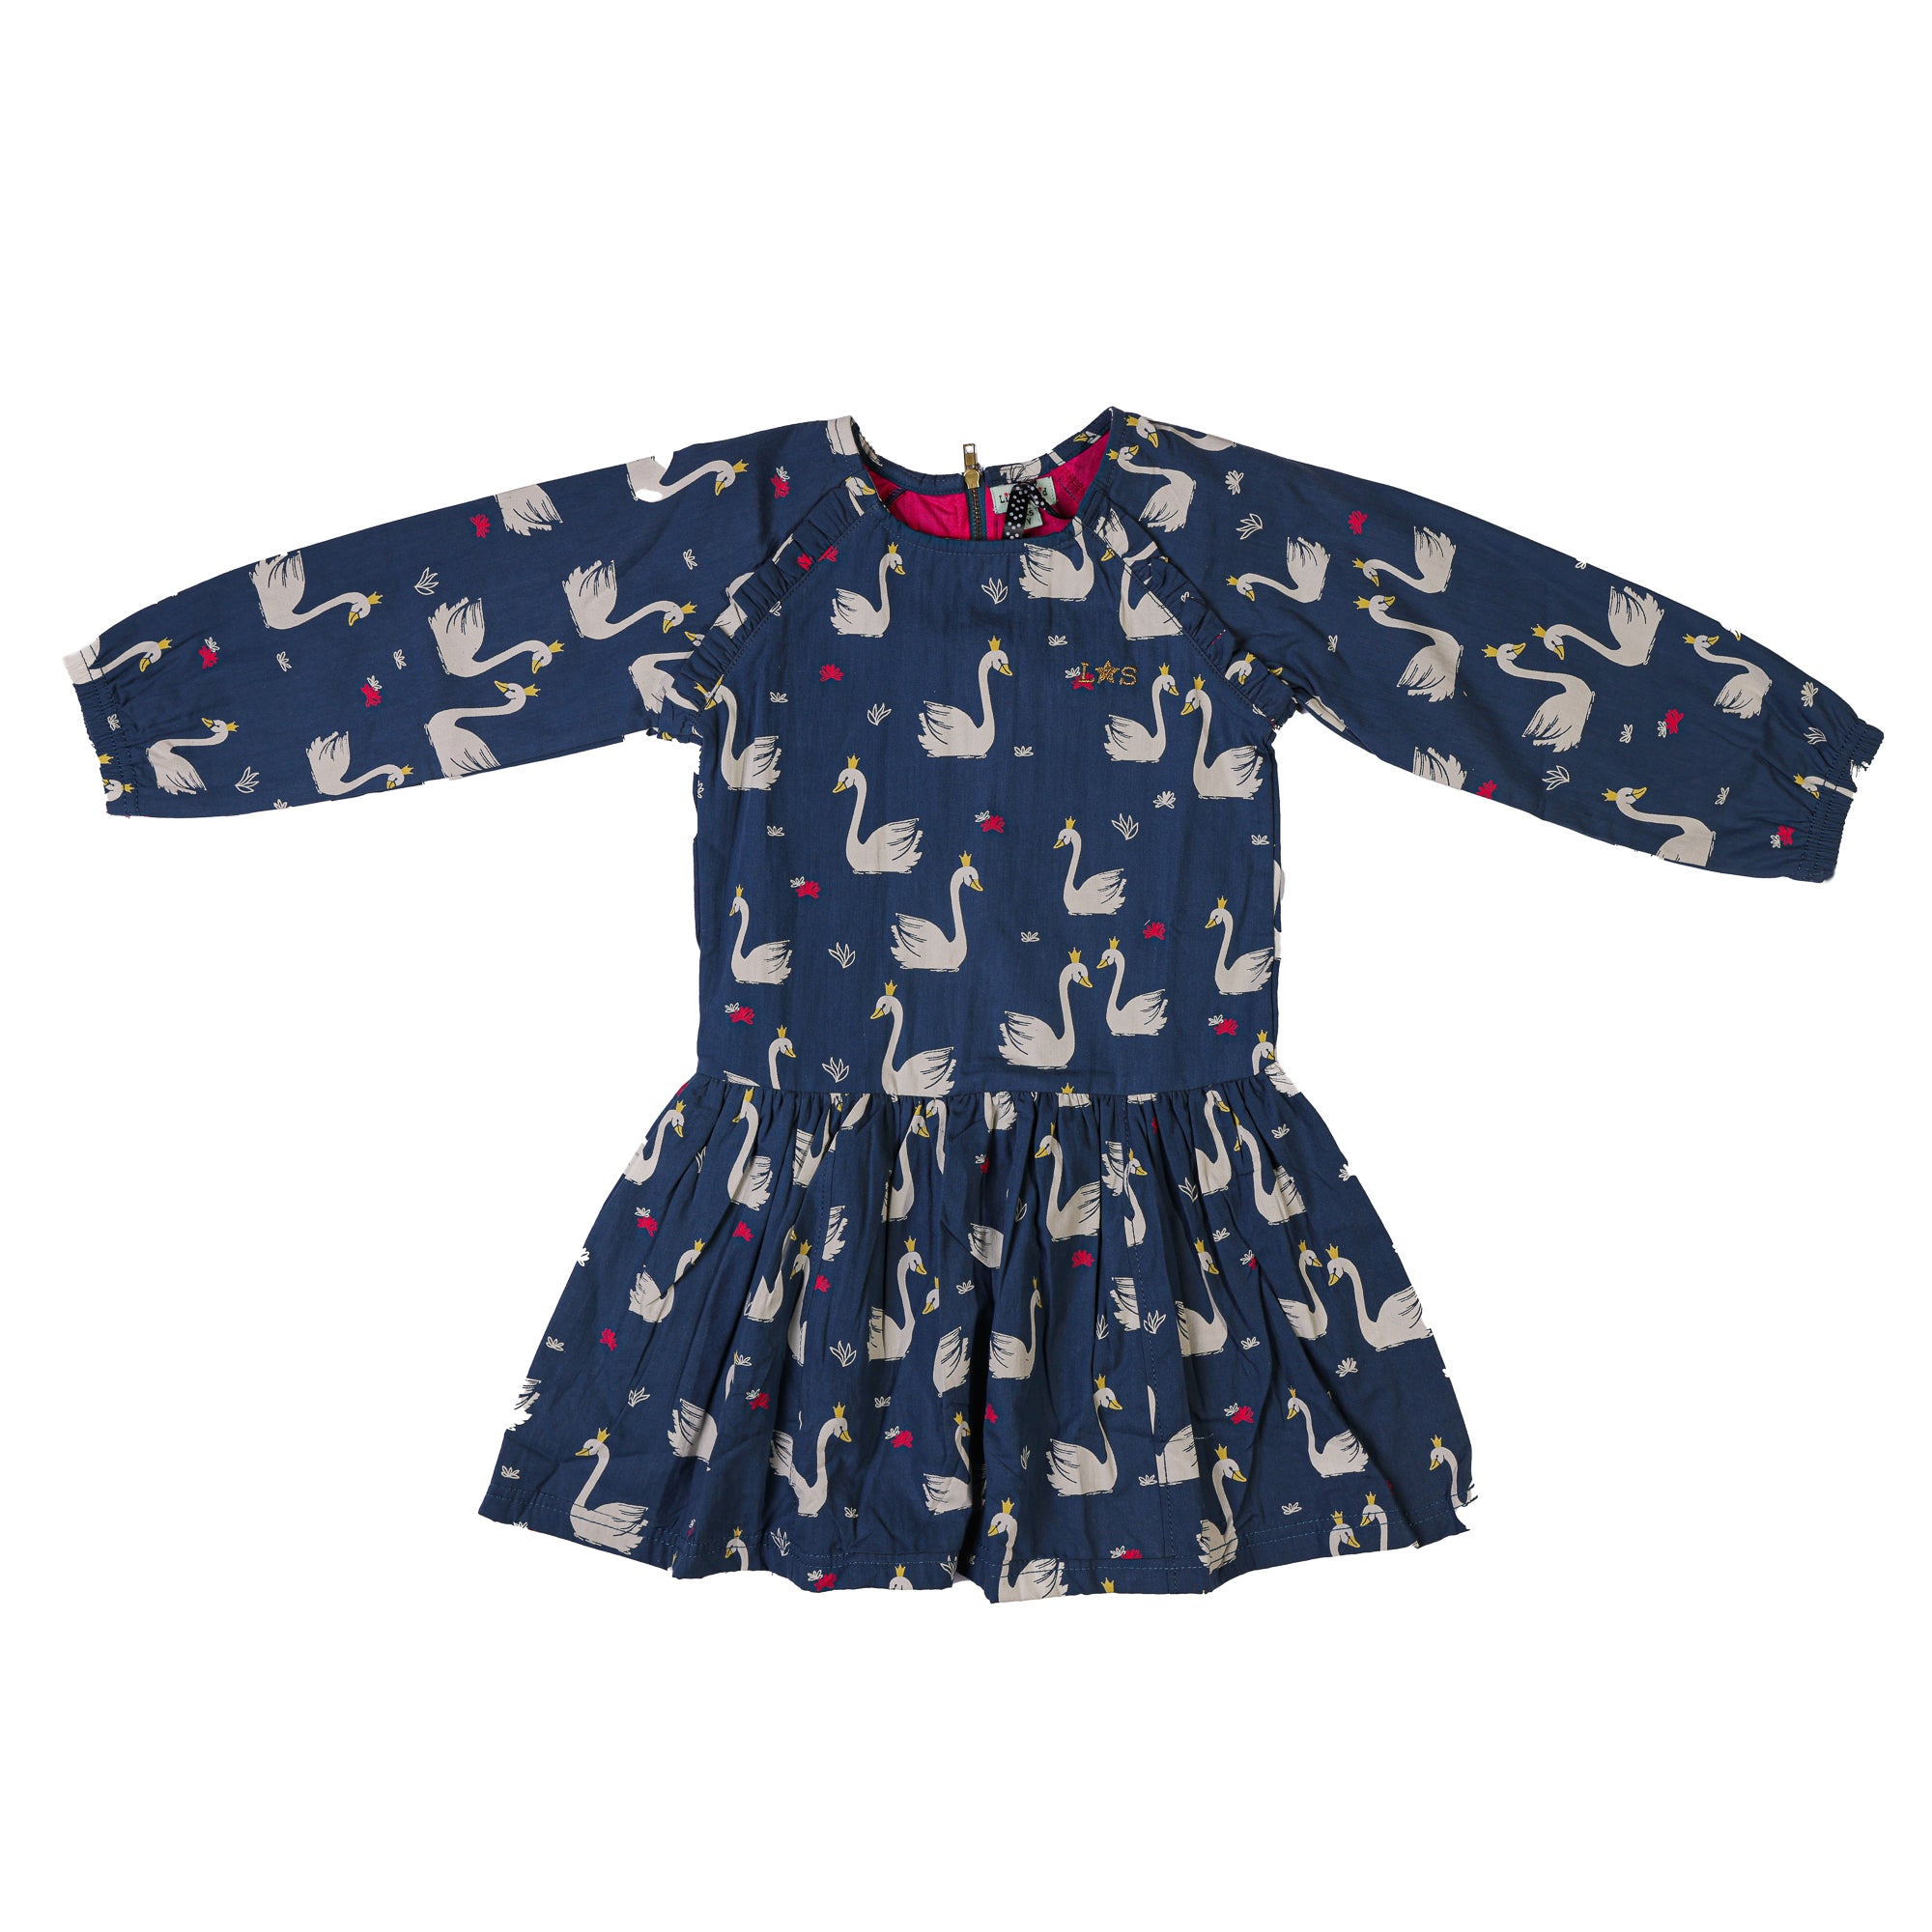 Long sleeve cotton dress for girls with blue swan prints